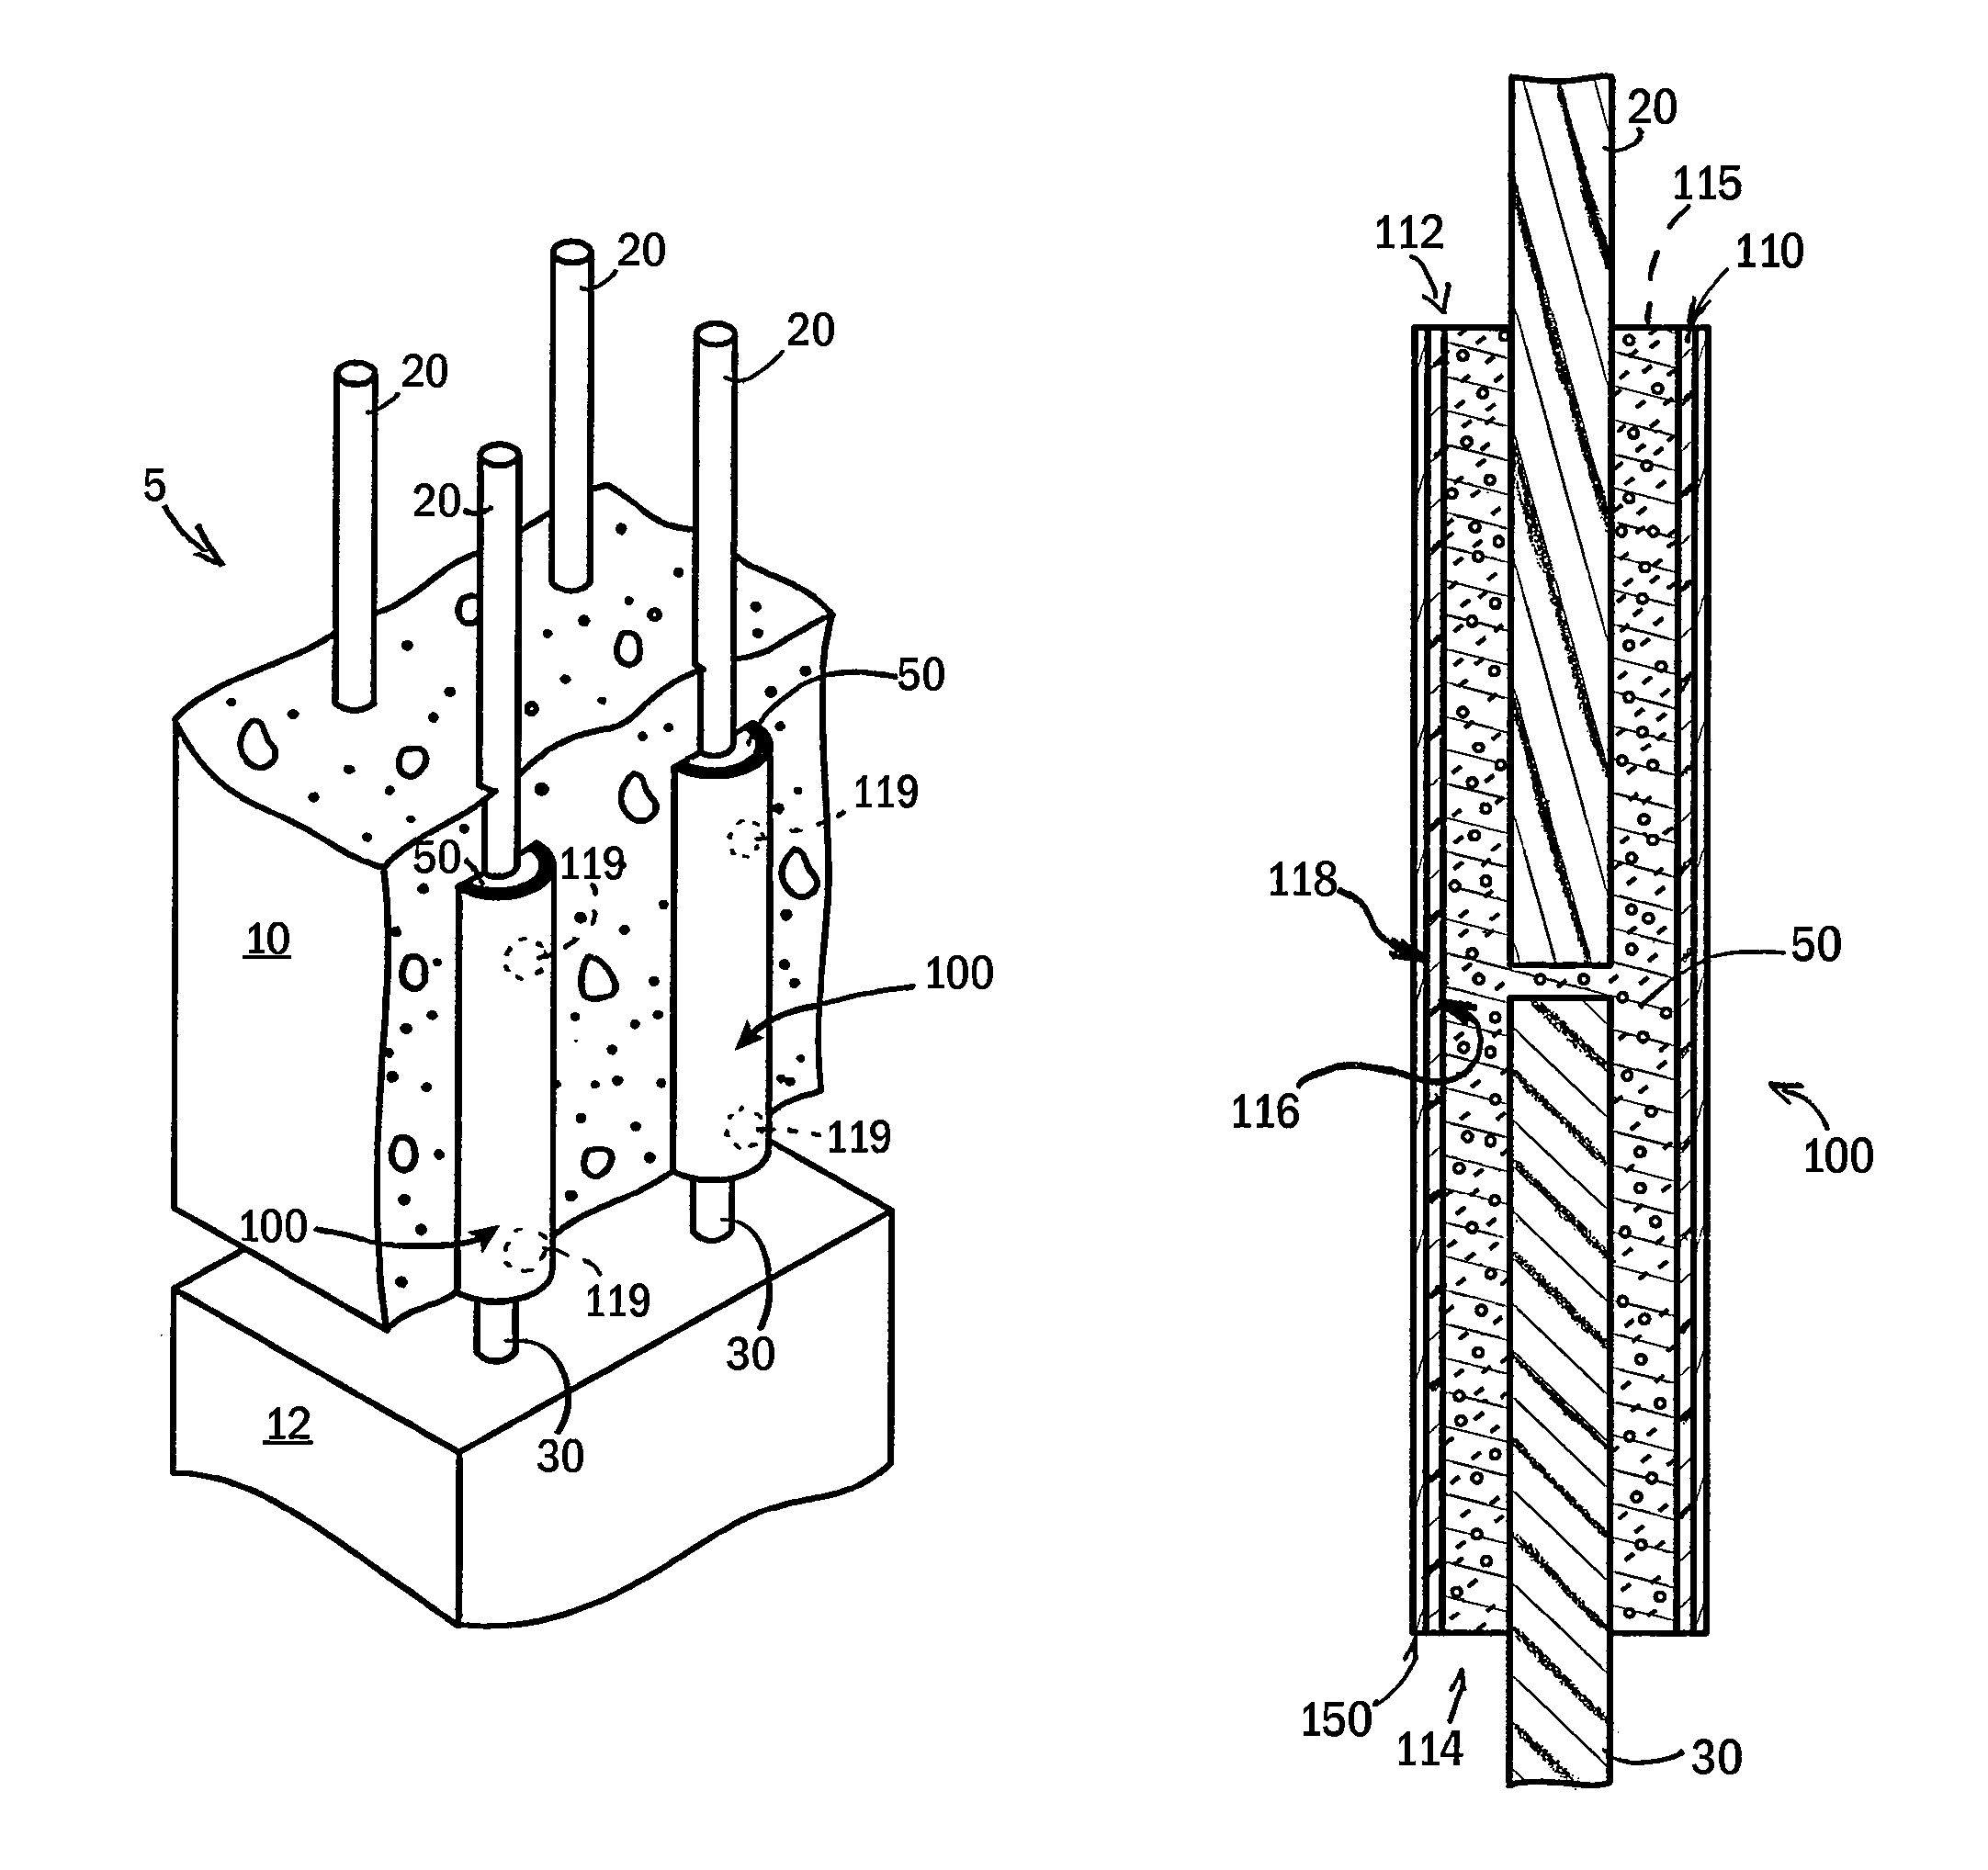 Splice system for connecting rebars in concrete assemblies